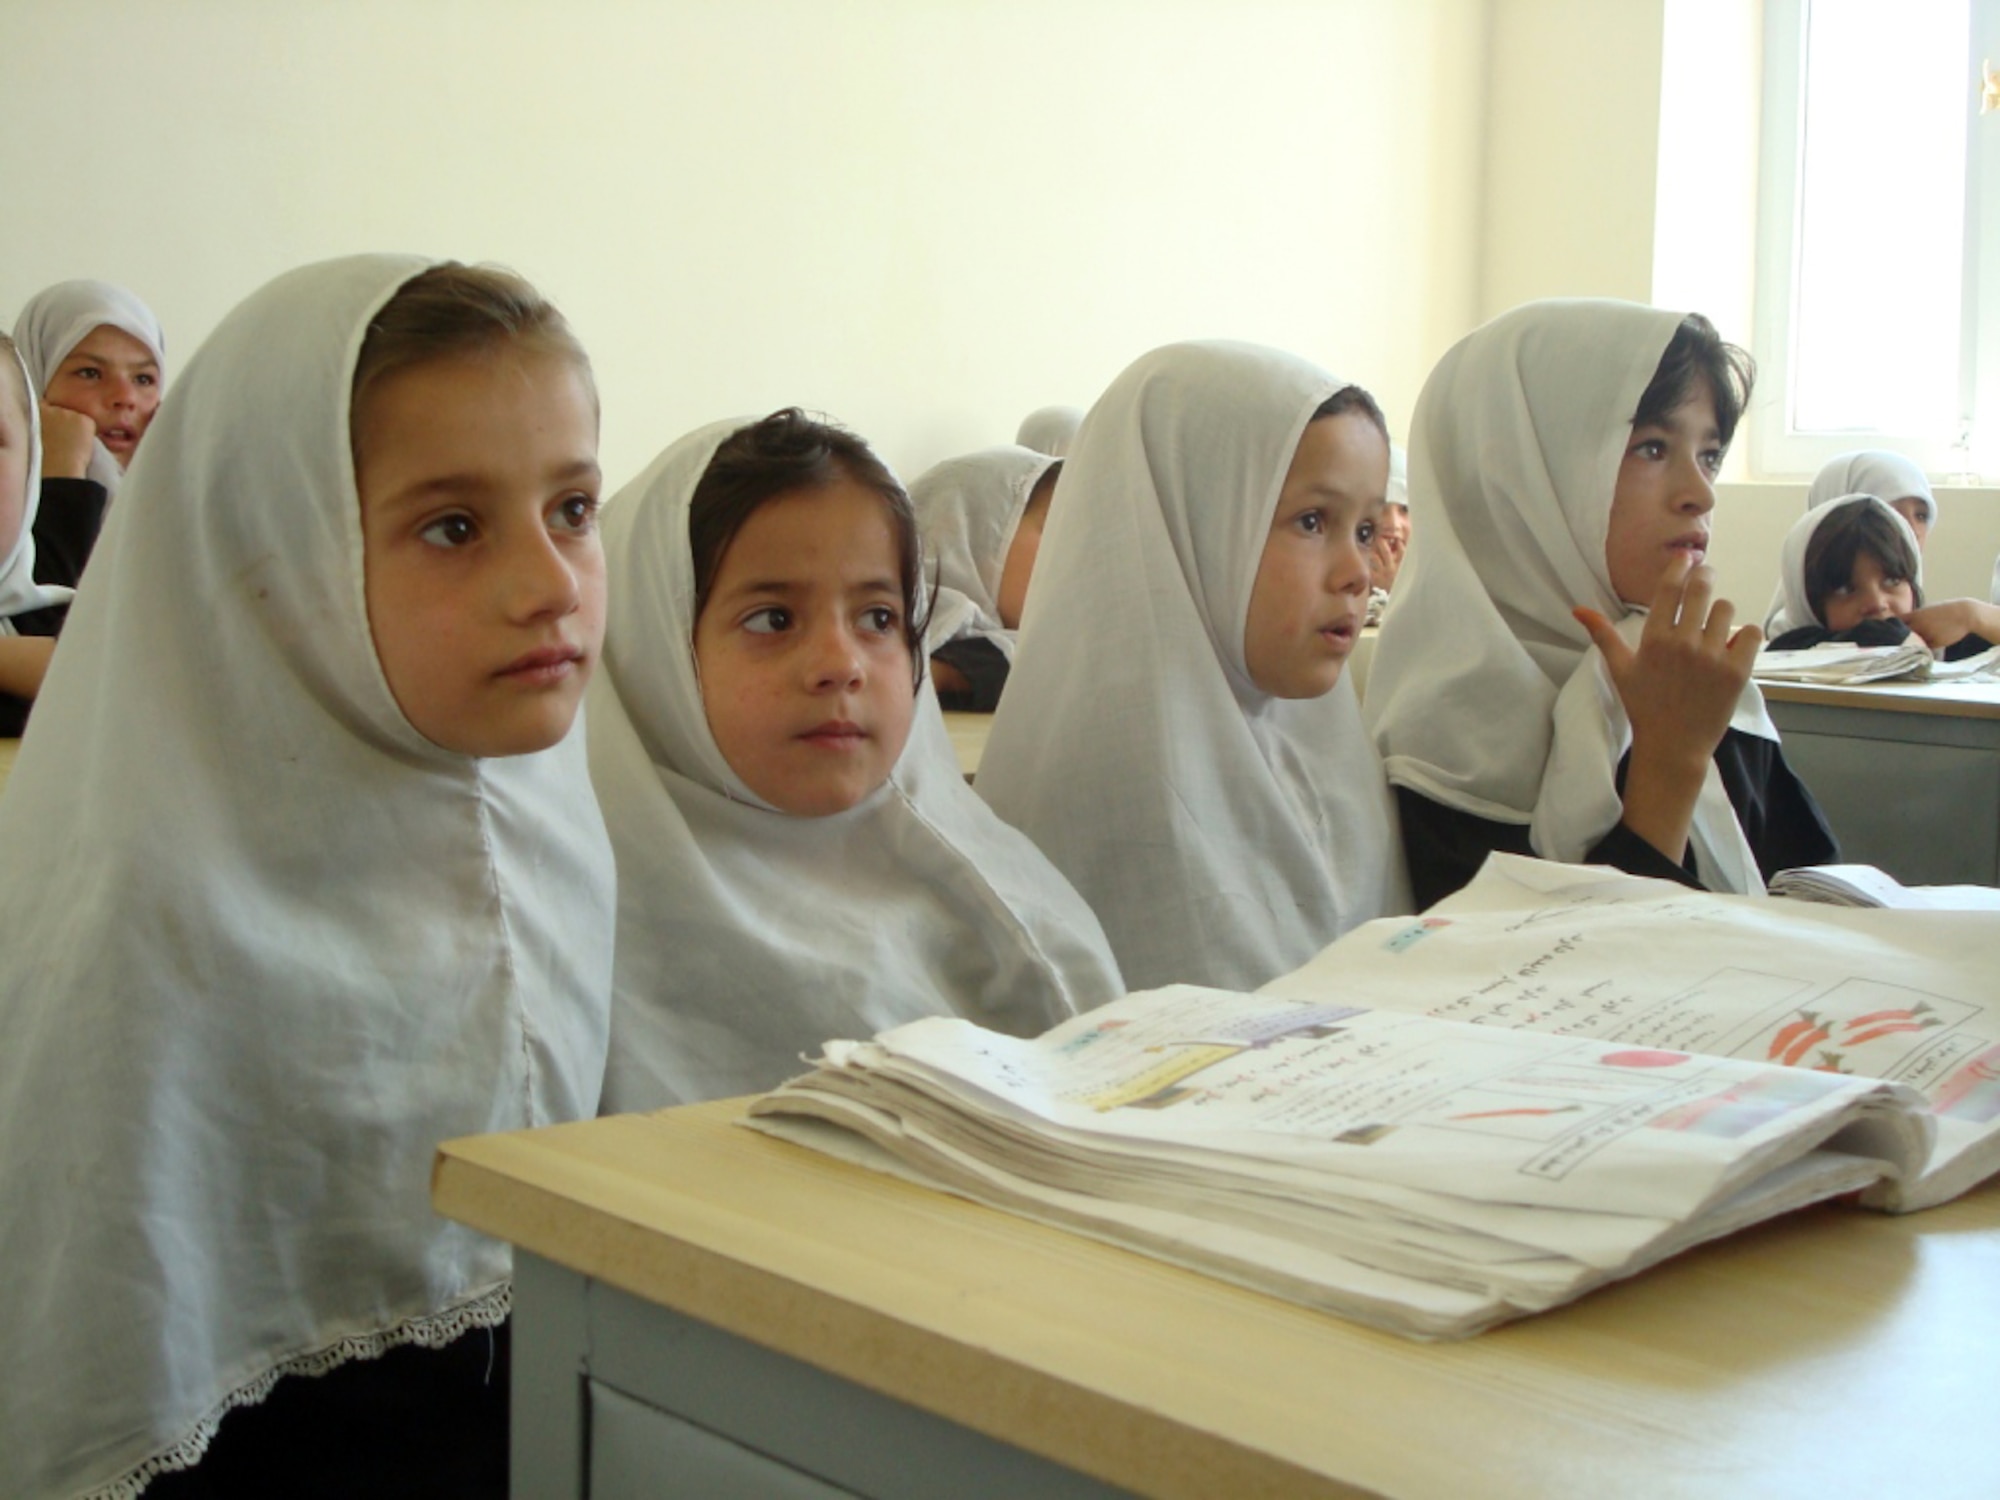 For many first graders at the newly opened eight-classroom Haish Saidqi Girls? School, this is their first time they will be receiving formal education. According to the Afghan Ministry of Education, there are 1.7 million girls studying in primary schools across the country. (U.S. Air Force photo by Capt. Stacie N. Shafran)                        